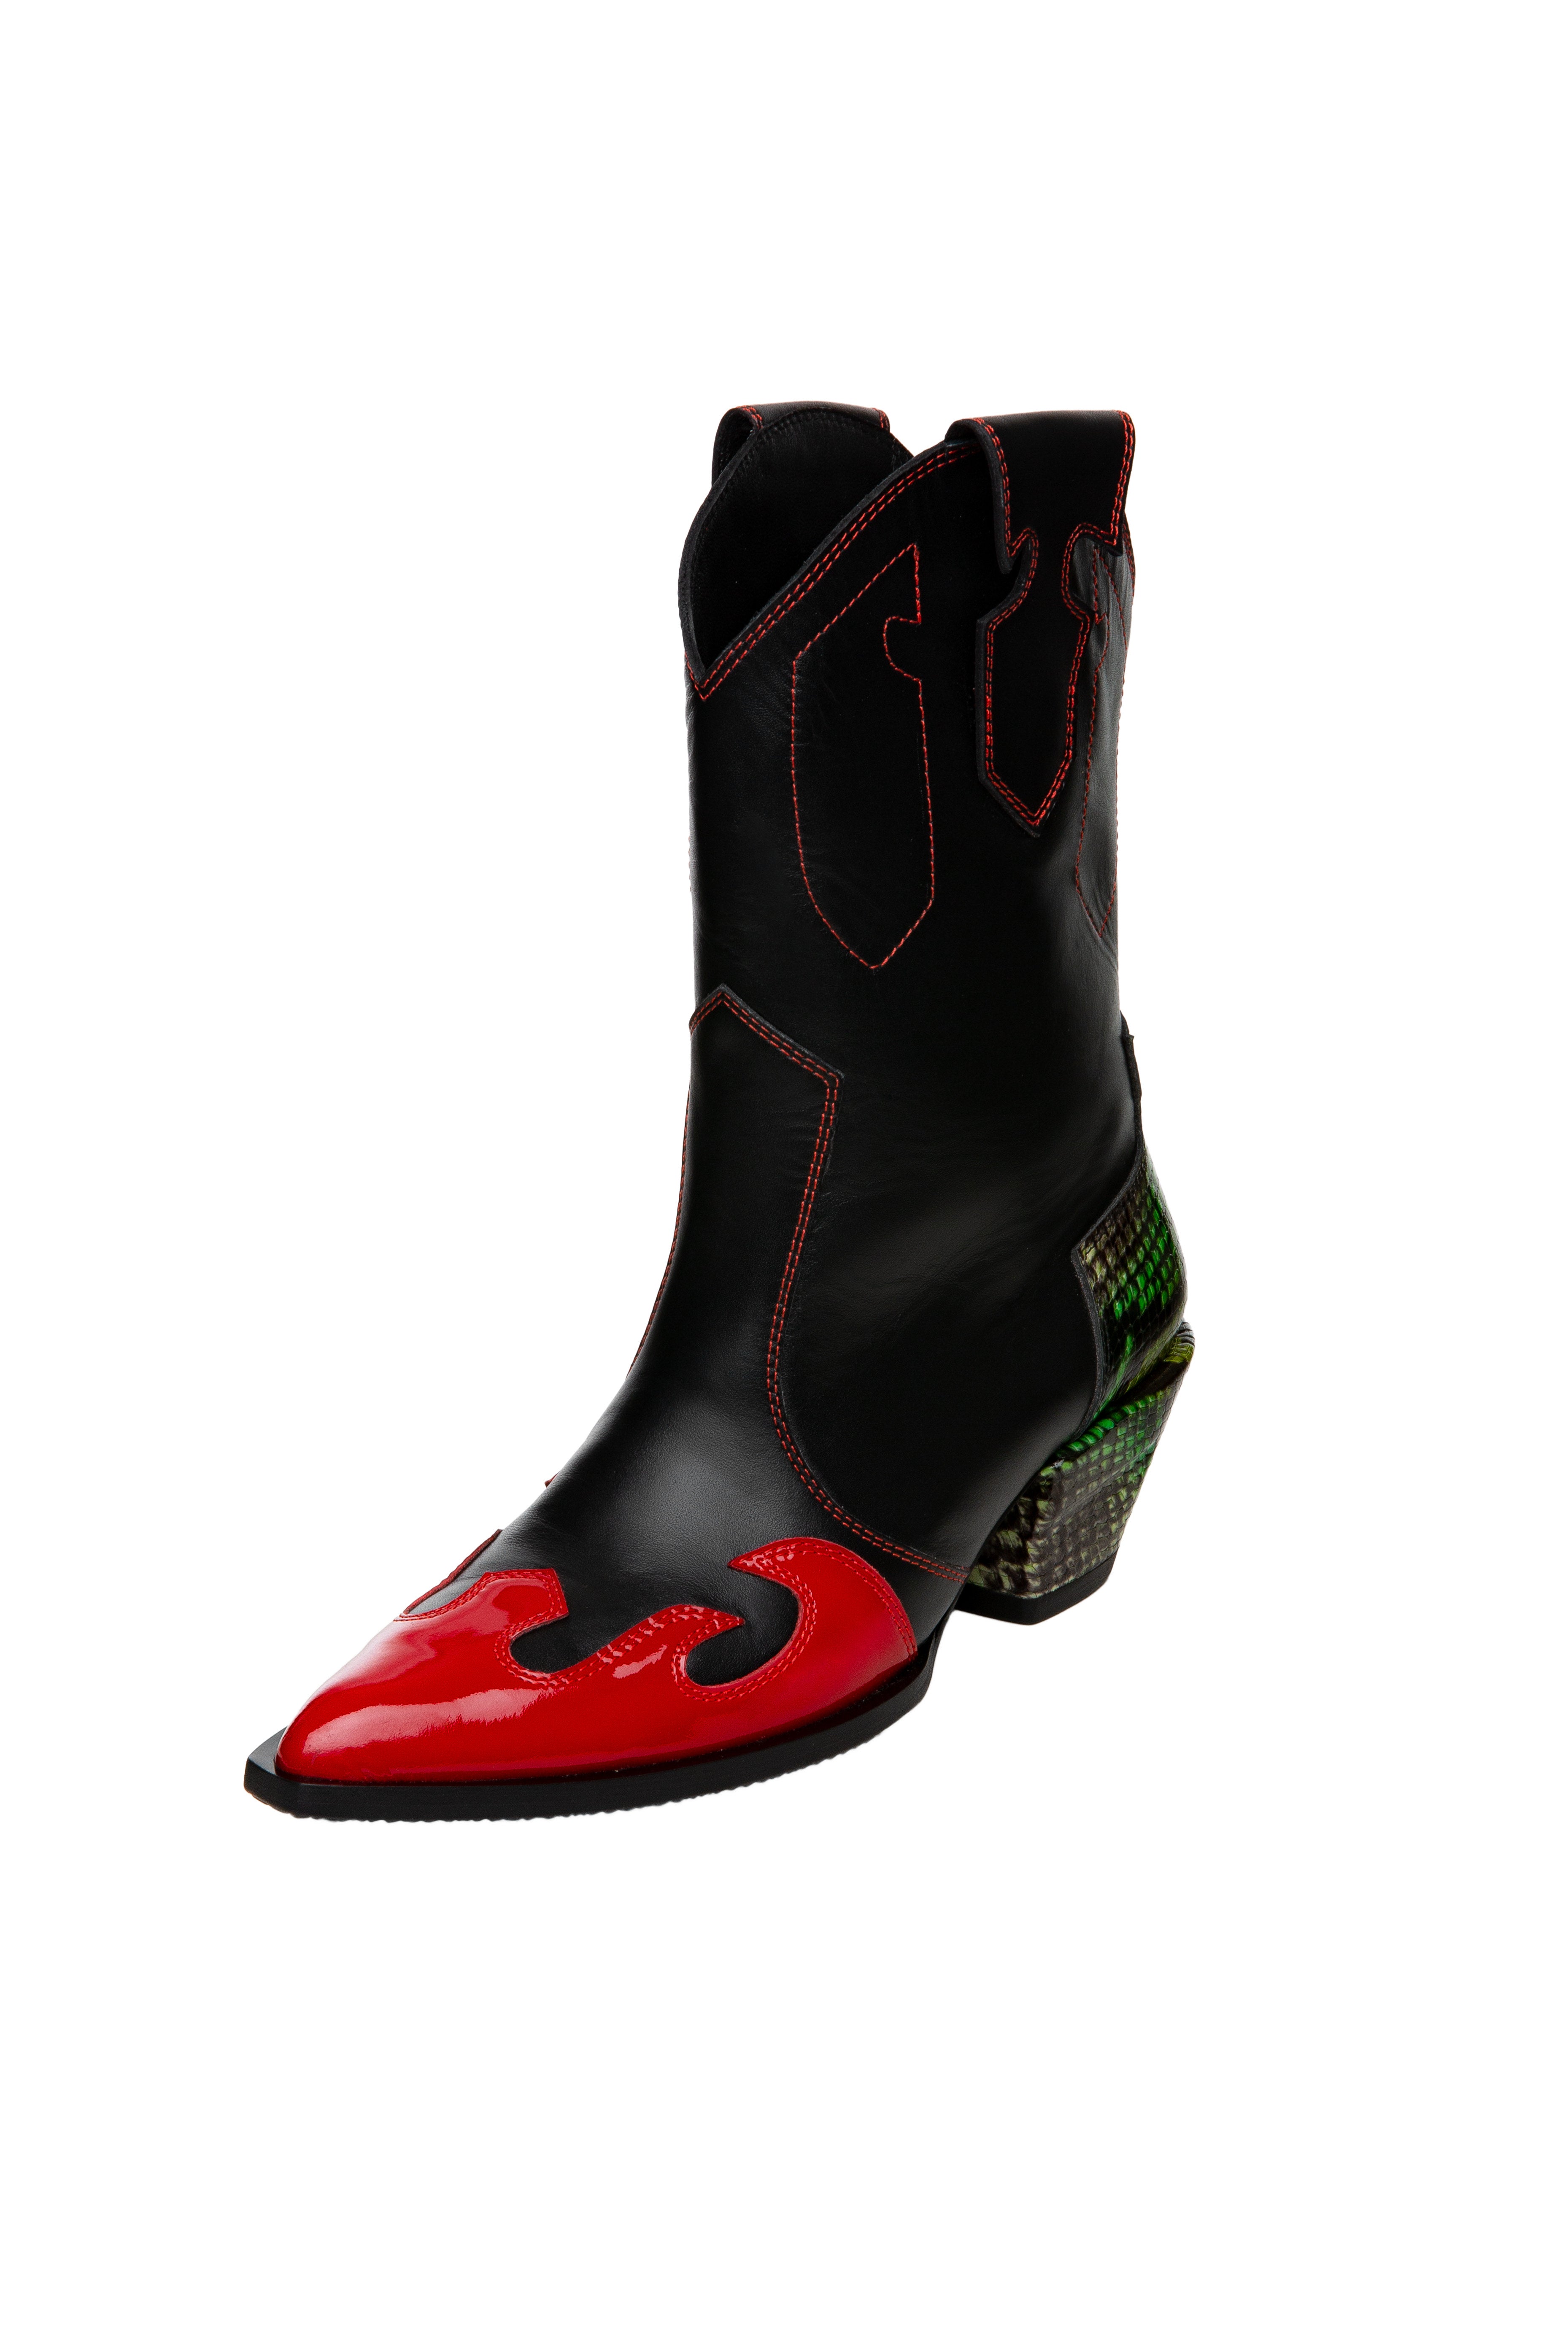 Cowboy boots with green and red details